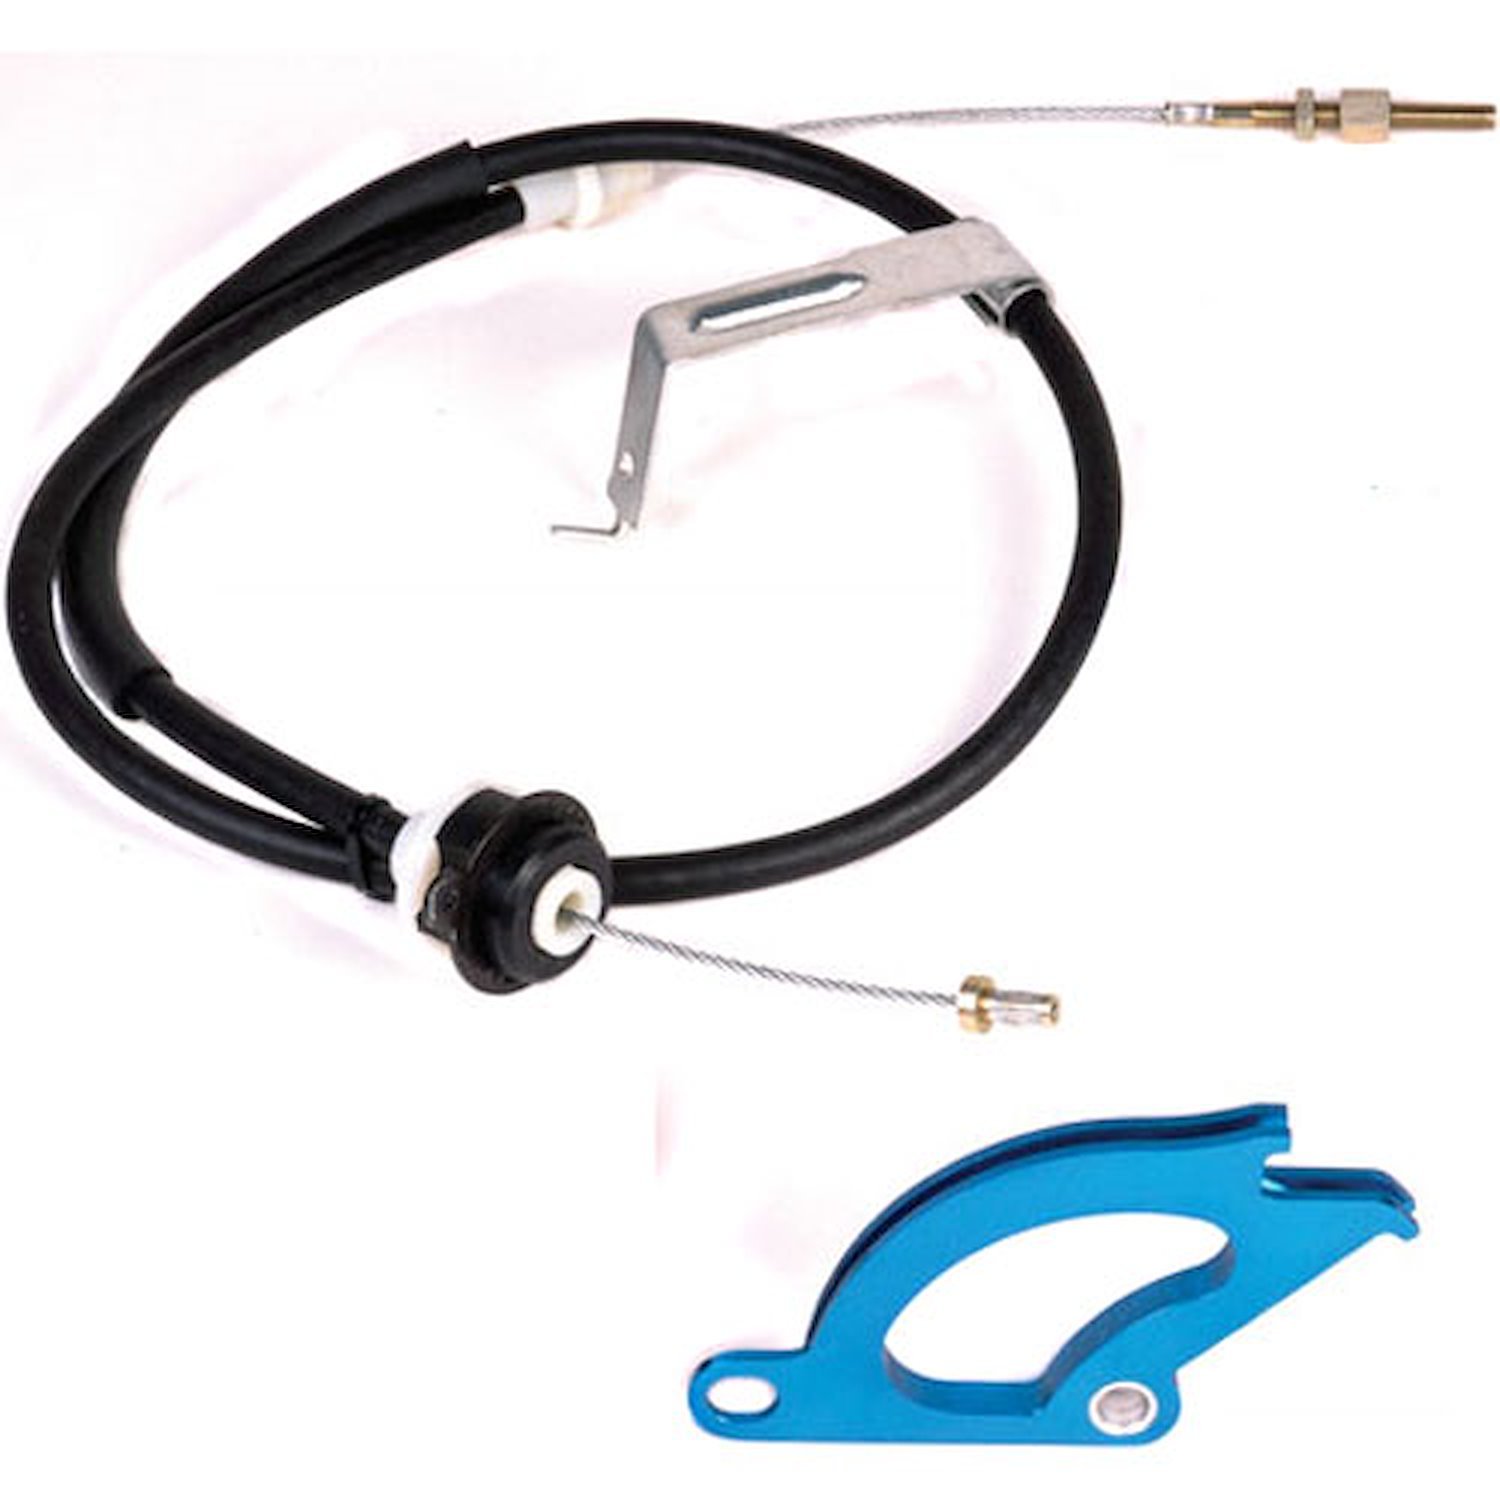 Adjustable Quadrant & Clutch Cable Kit Mustang 1979-2004